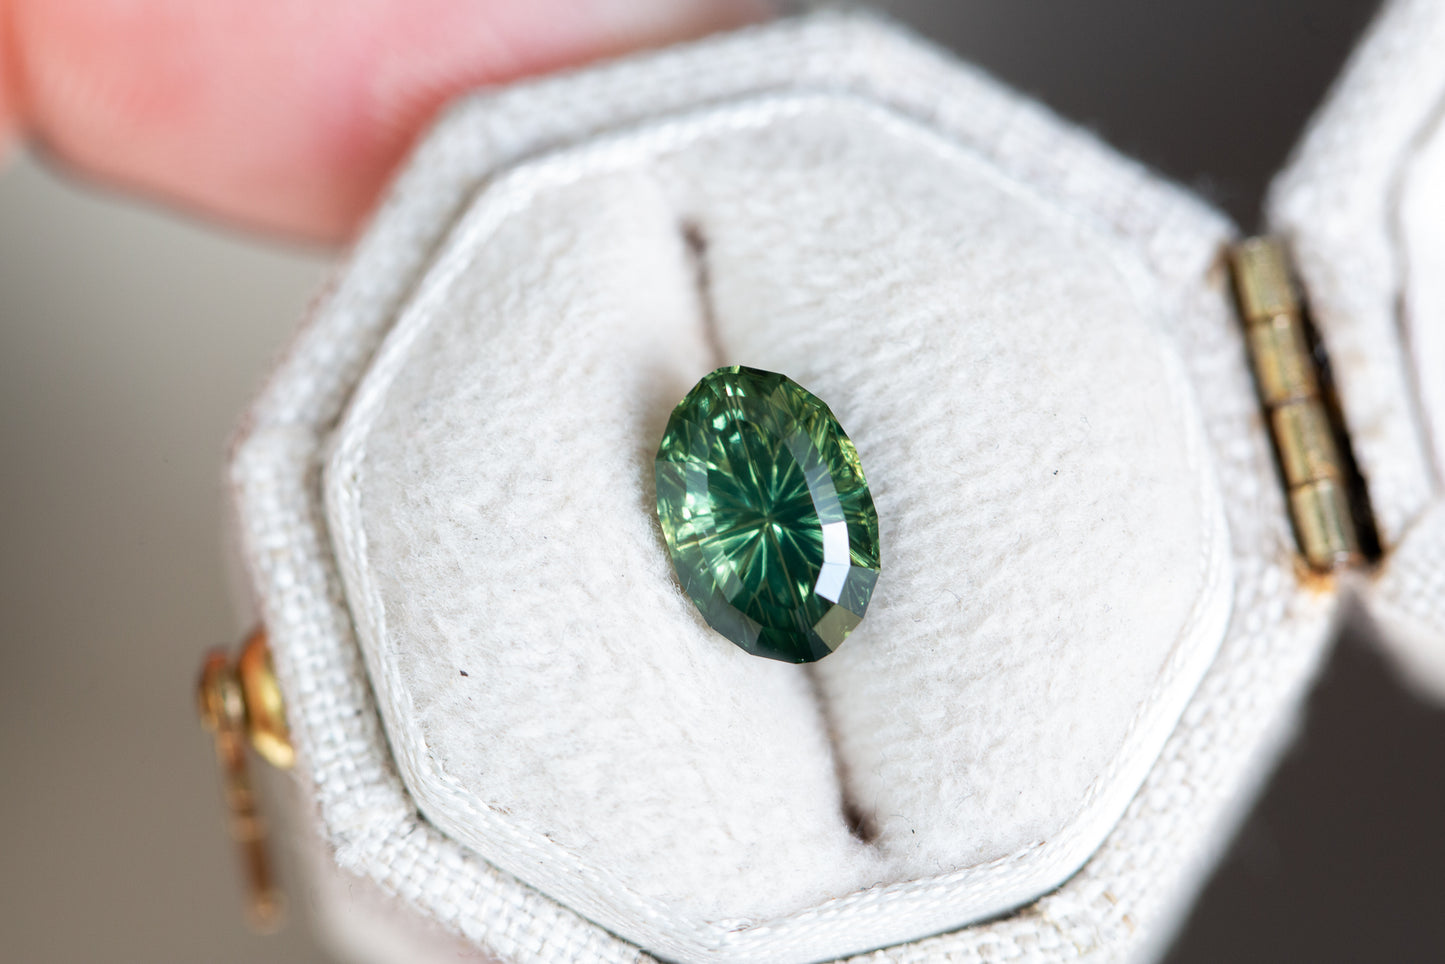 Load image into Gallery viewer, 2.03ct green teal sapphire, starbrite cut from John Dyer
